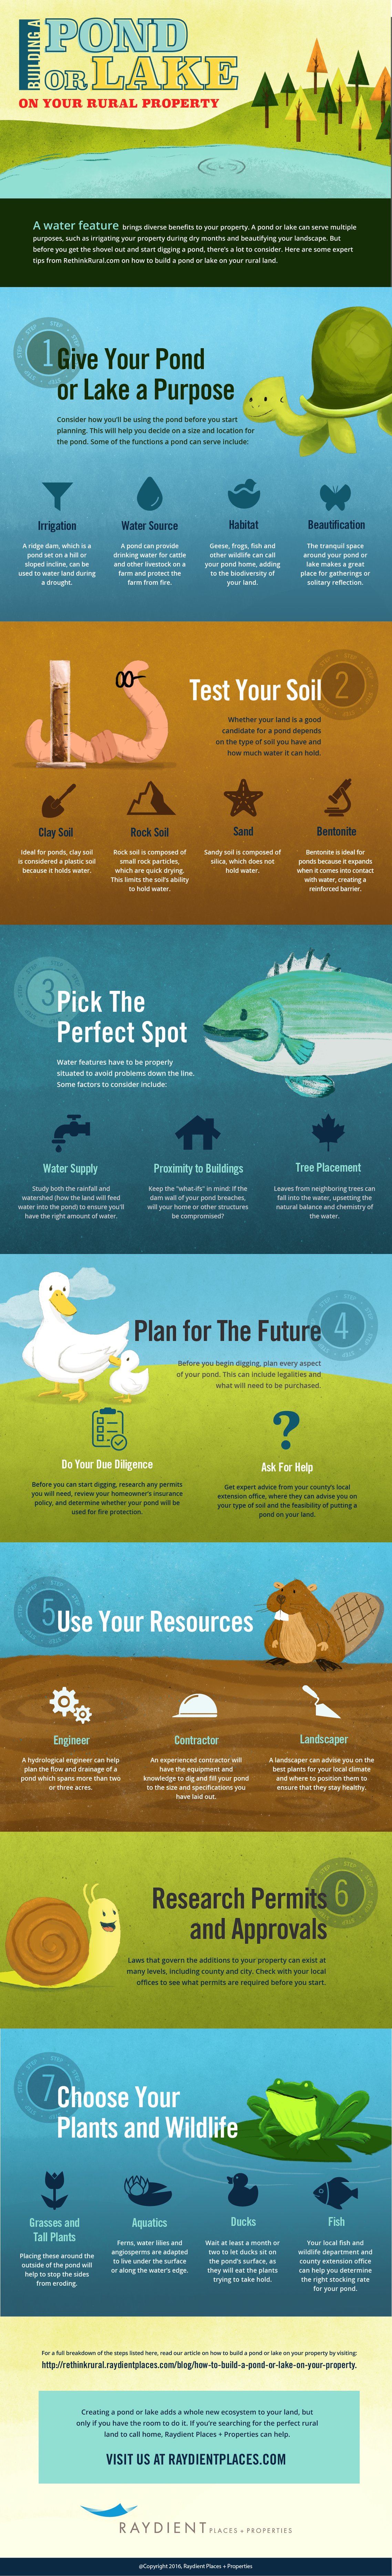 How to Build a Pond or Lake on Rural Property Infographic.png